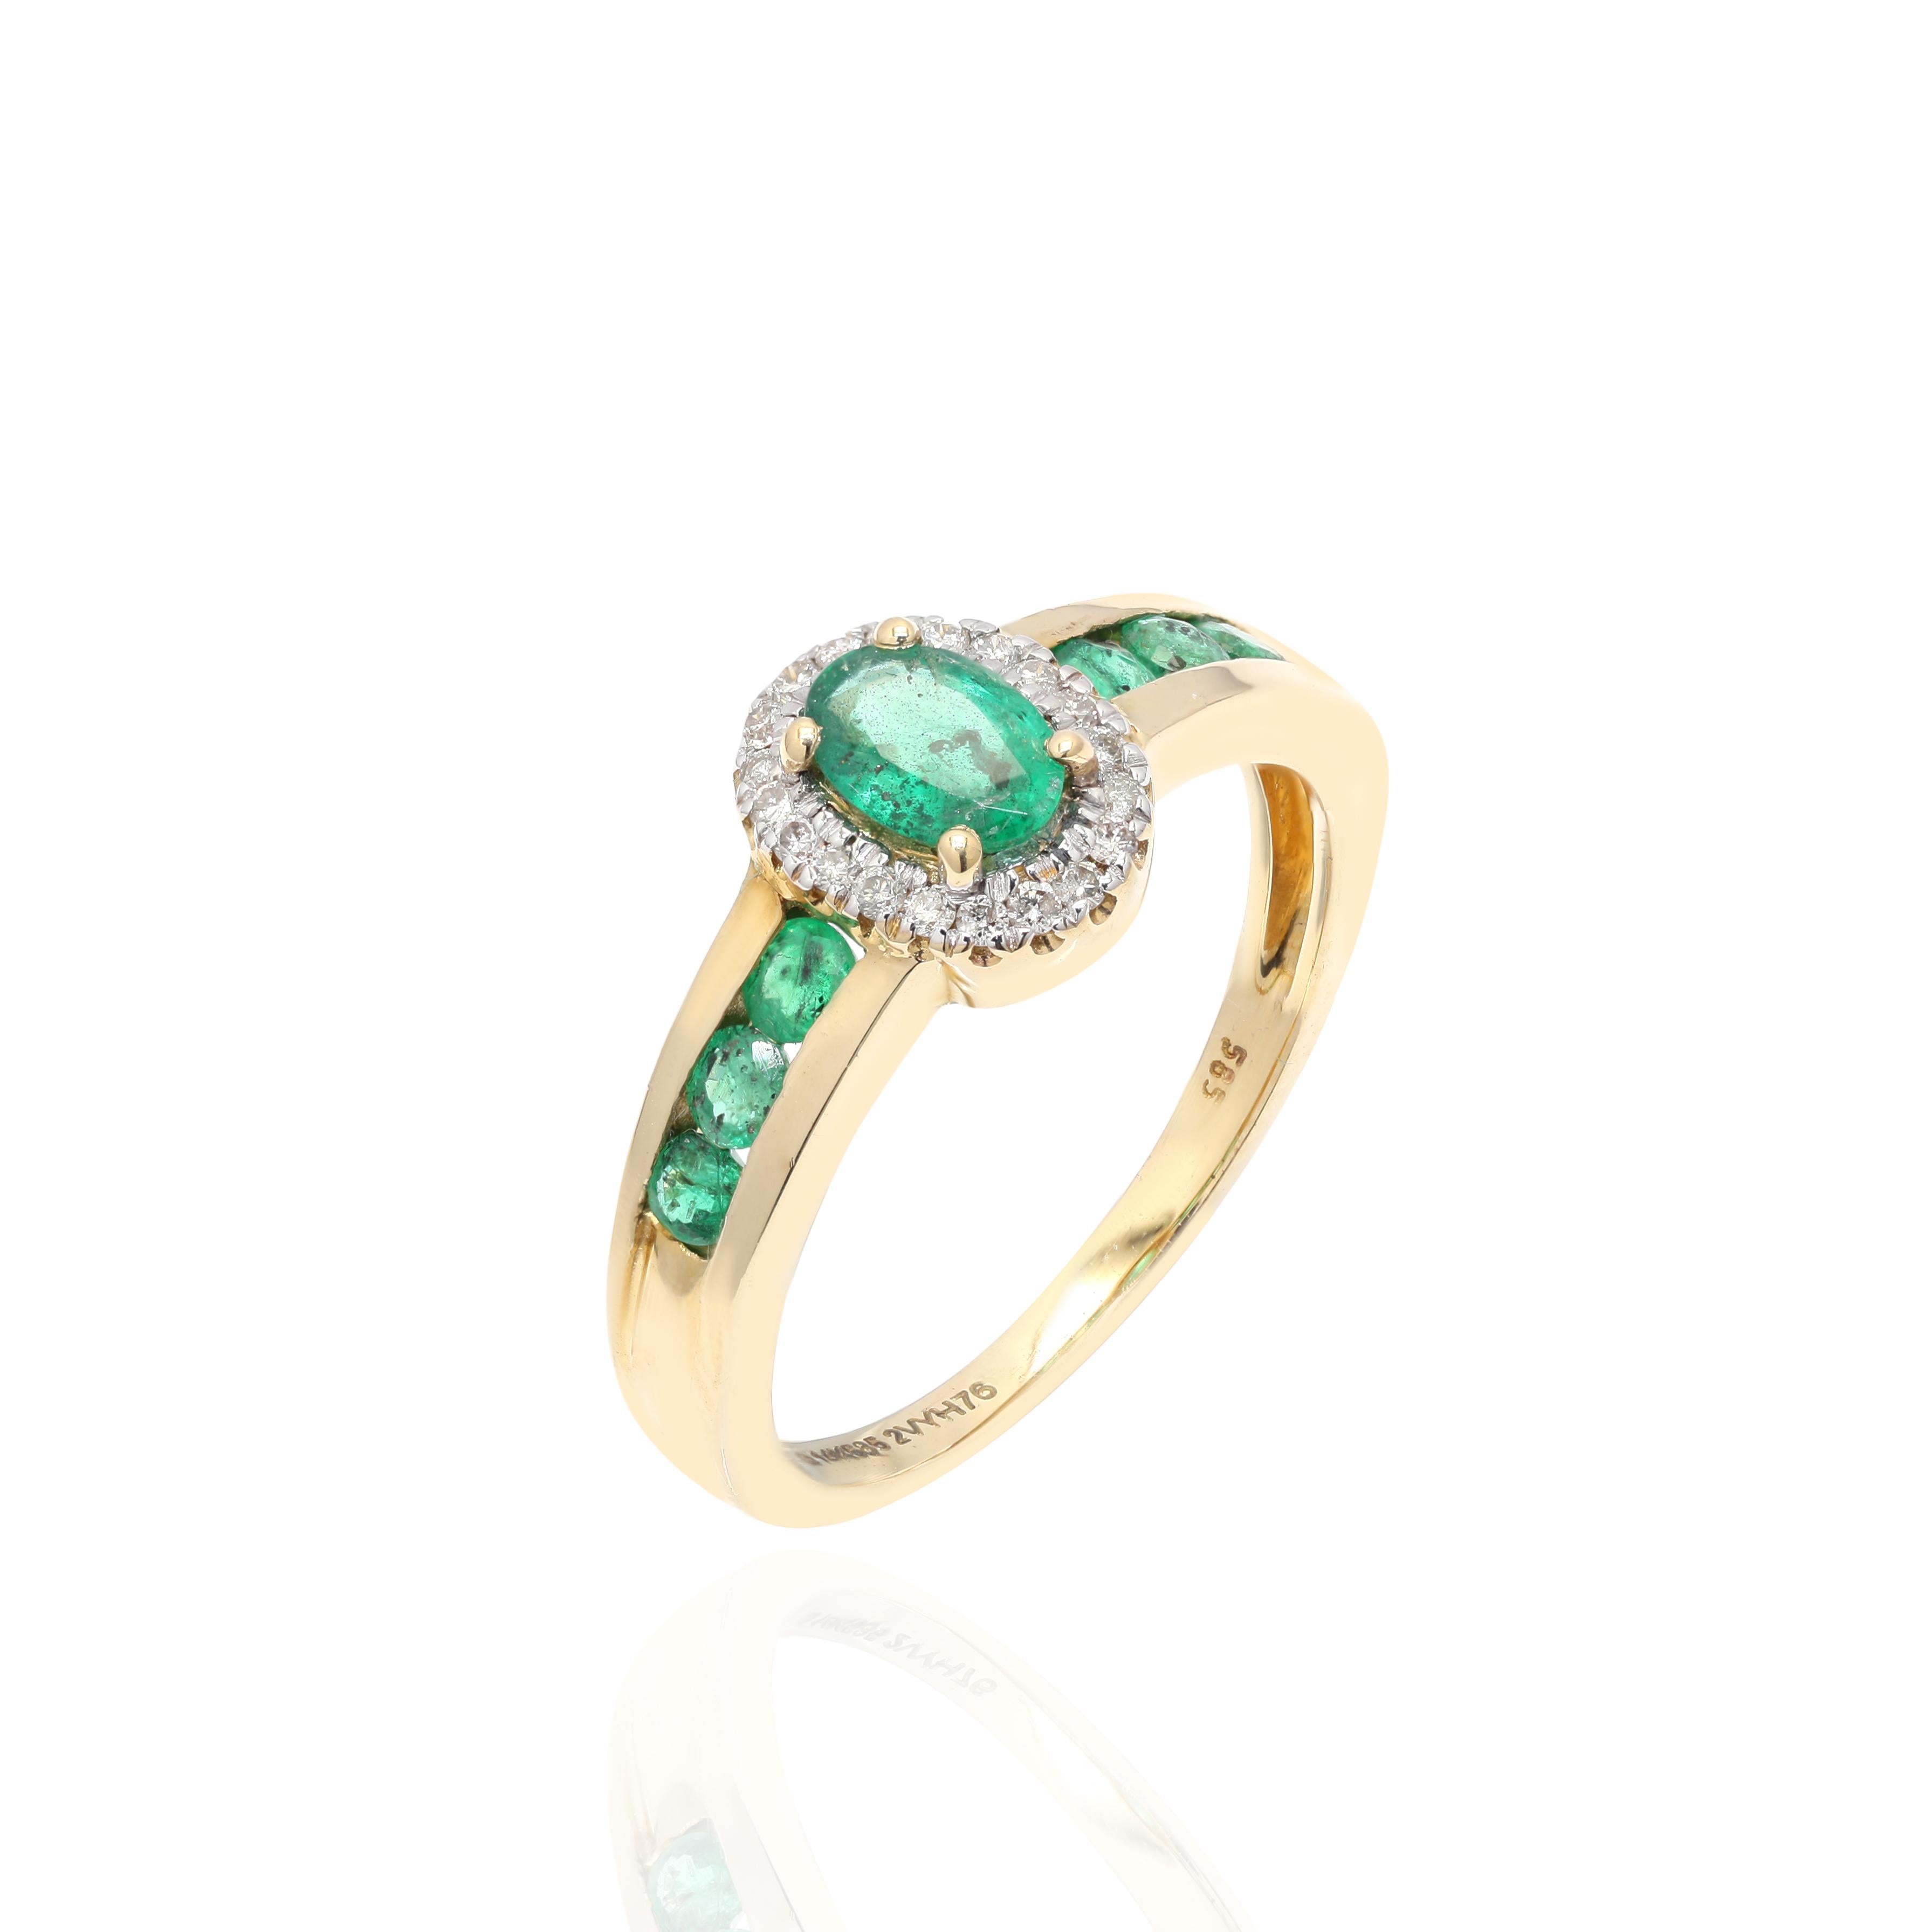 For Sale:  Emerald Engagement Ring with Halo Diamond Set in 14K Solid Yellow Gold 4